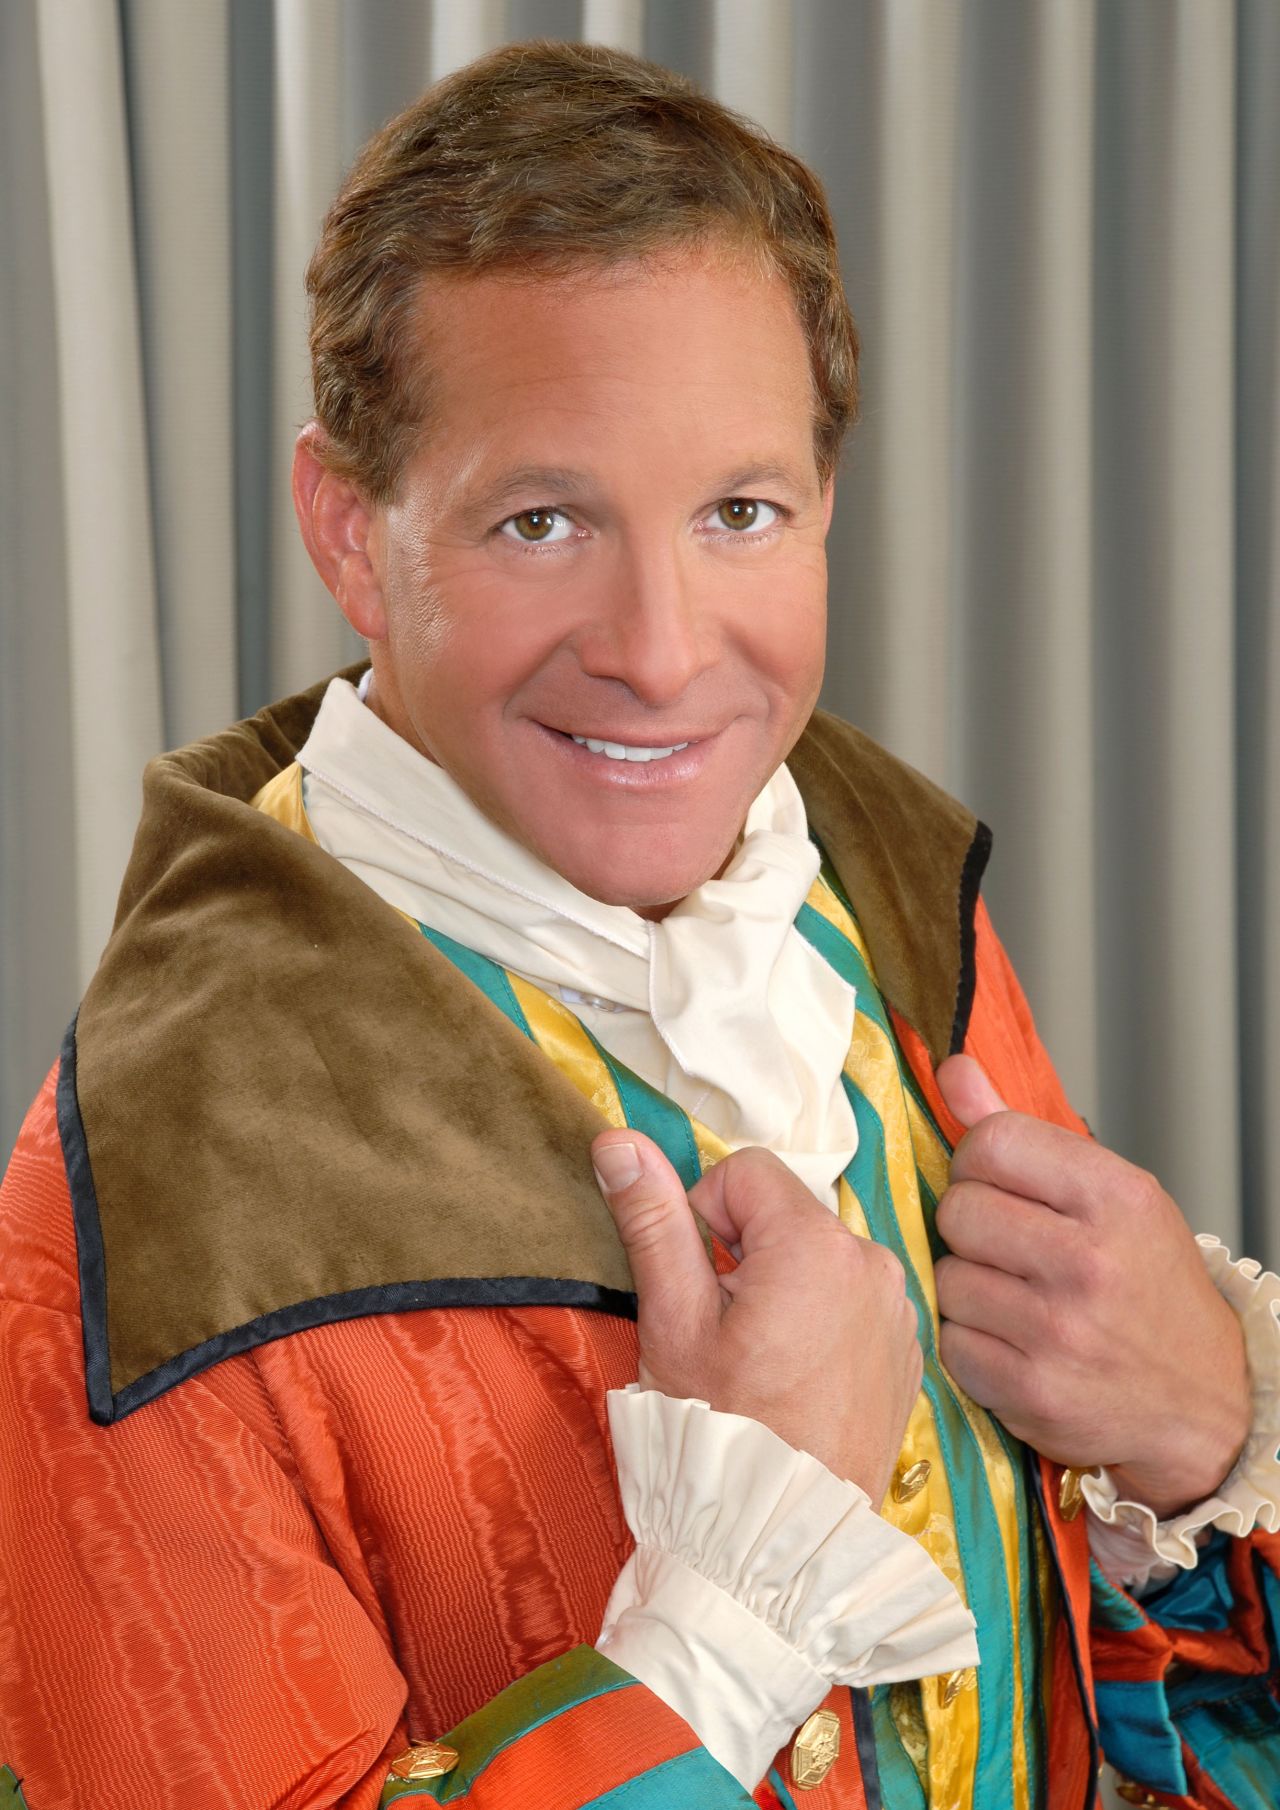 Steve Guttenberg ("Three Men and A Baby" and four "Police Academy" films) as Baron Hardup in "Cinderella" at the Churchill Theatre, Bromley (2008). Guttenberg apparently turned down two movie offers to play Baron Hardup -- taking the advice of his good friend Henry Winkler. 